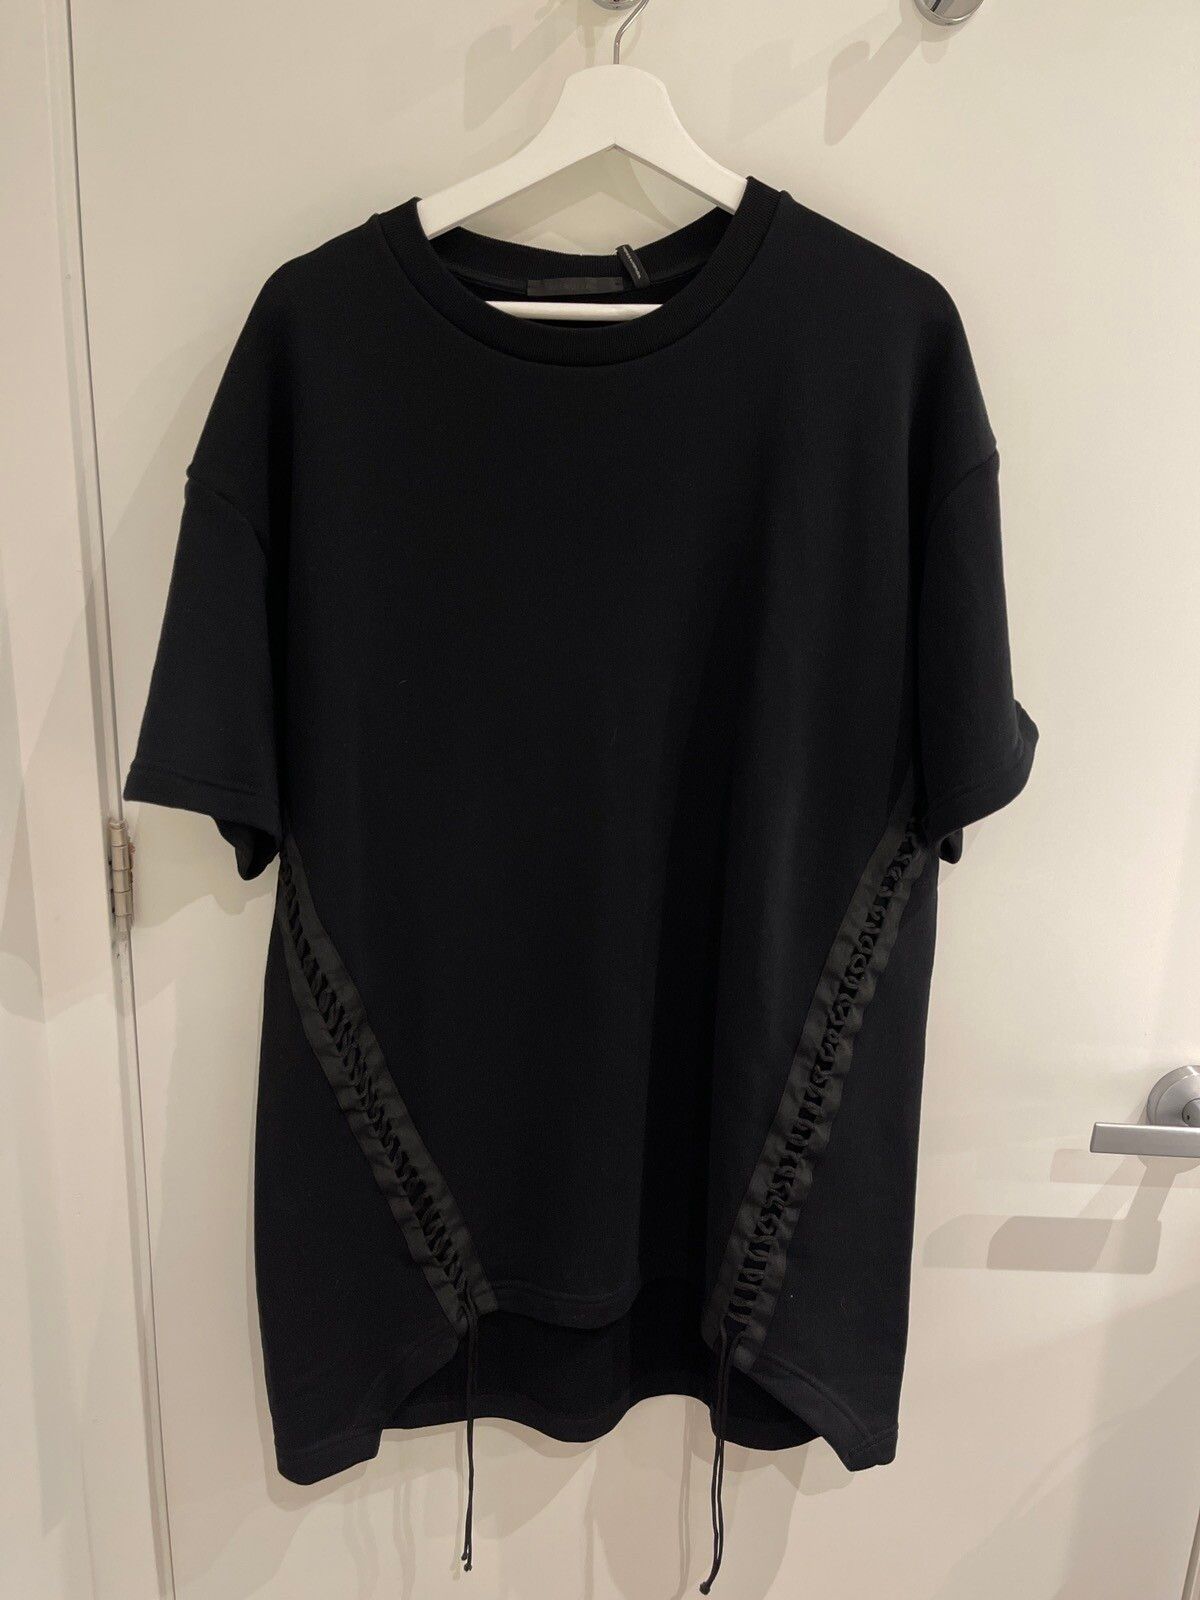 Helmut Lang Helmut Lang Laced SS Crew | Grailed